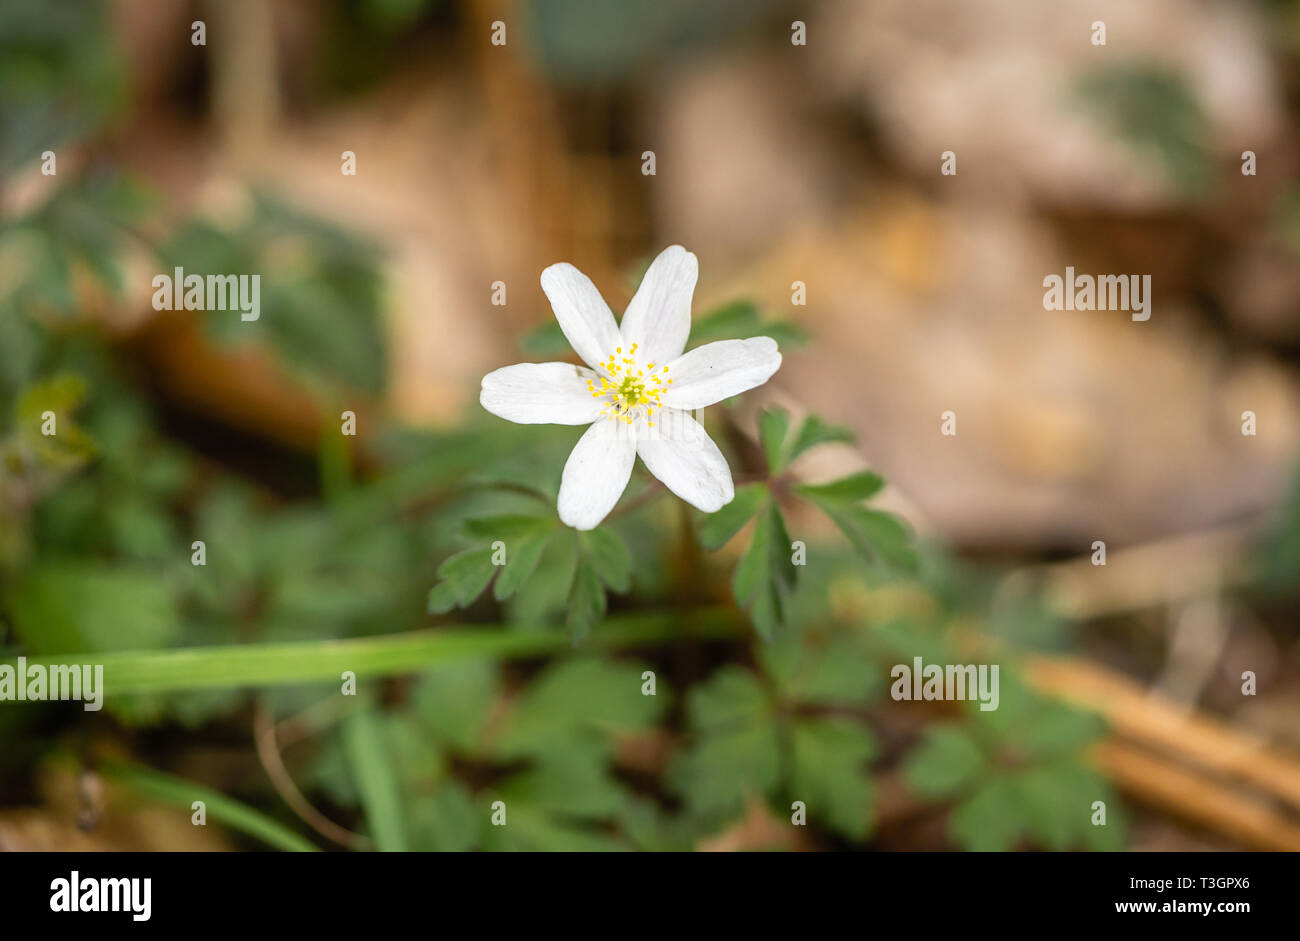 Close up of the white flower of the Anemone nemorosa (wood anemone) during spring in Southern England, UK Stock Photo